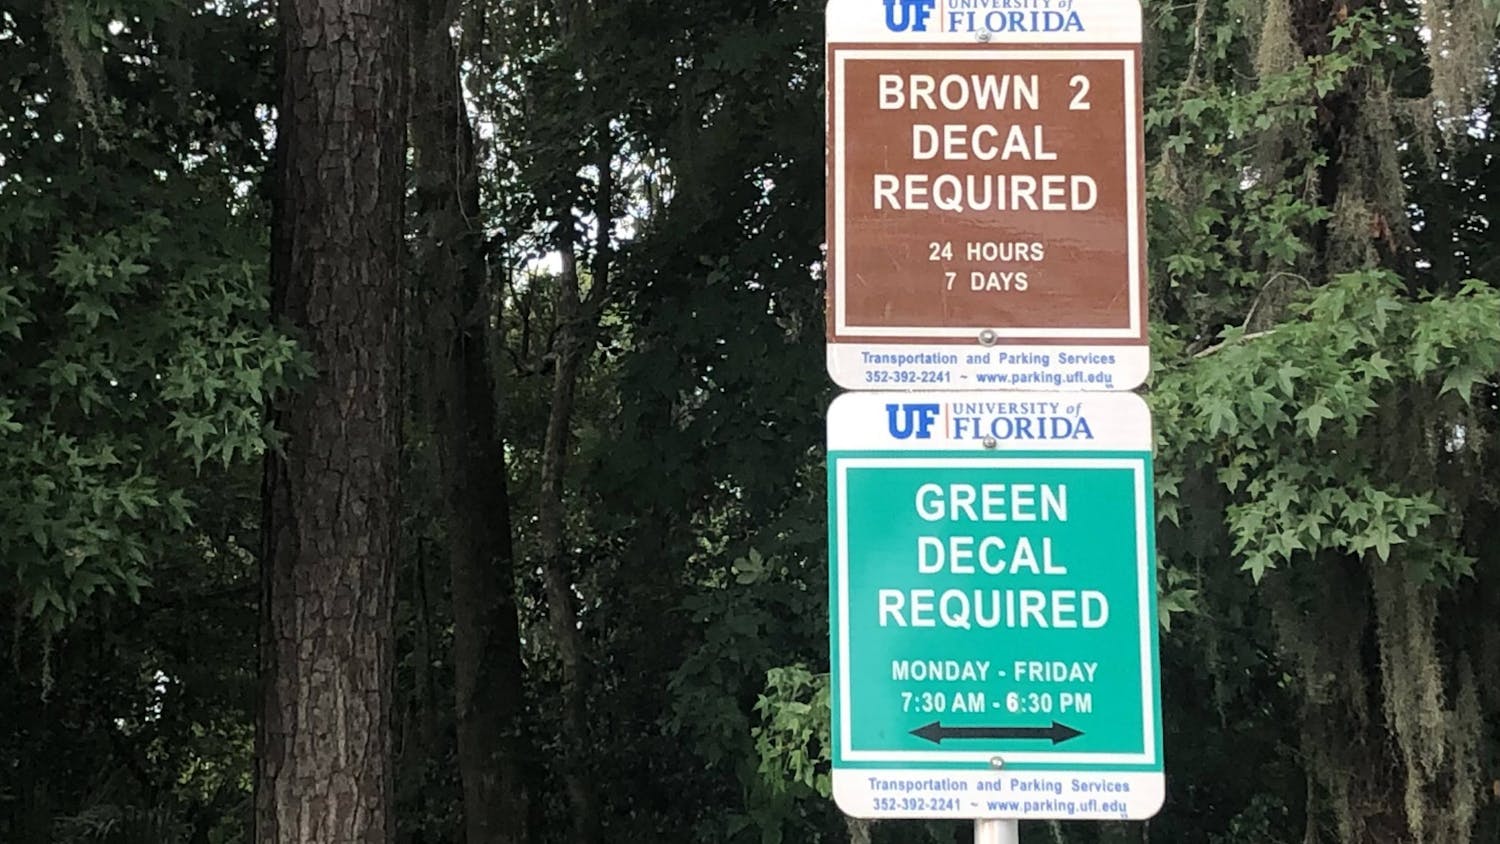 Graduates students are allowed to park with a green decal and students living in family housing are allowed to park with a brown decal as pictured Sunday, July 24, 2022.